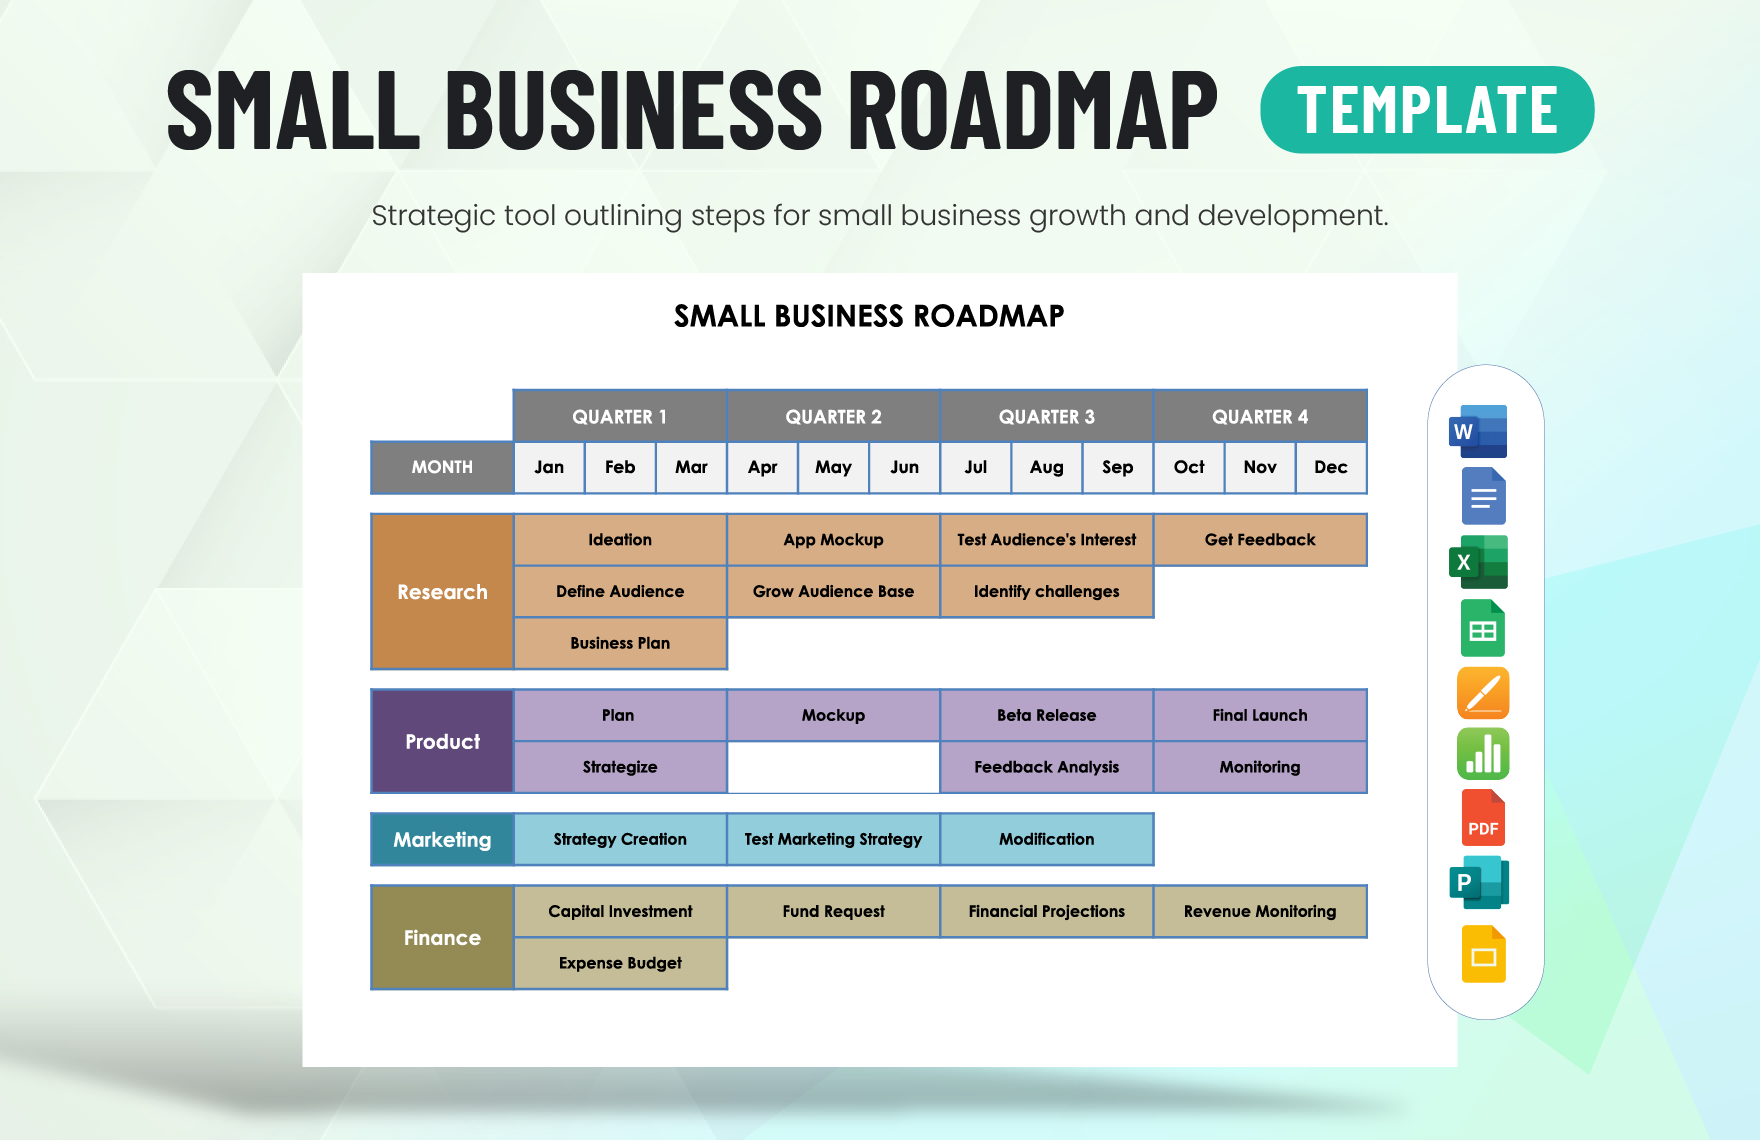 Small Business Roadmap Template in Word, Google Docs, Excel, PDF, Google Sheets, Apple Pages, PowerPoint, Google Slides, Apple Keynote